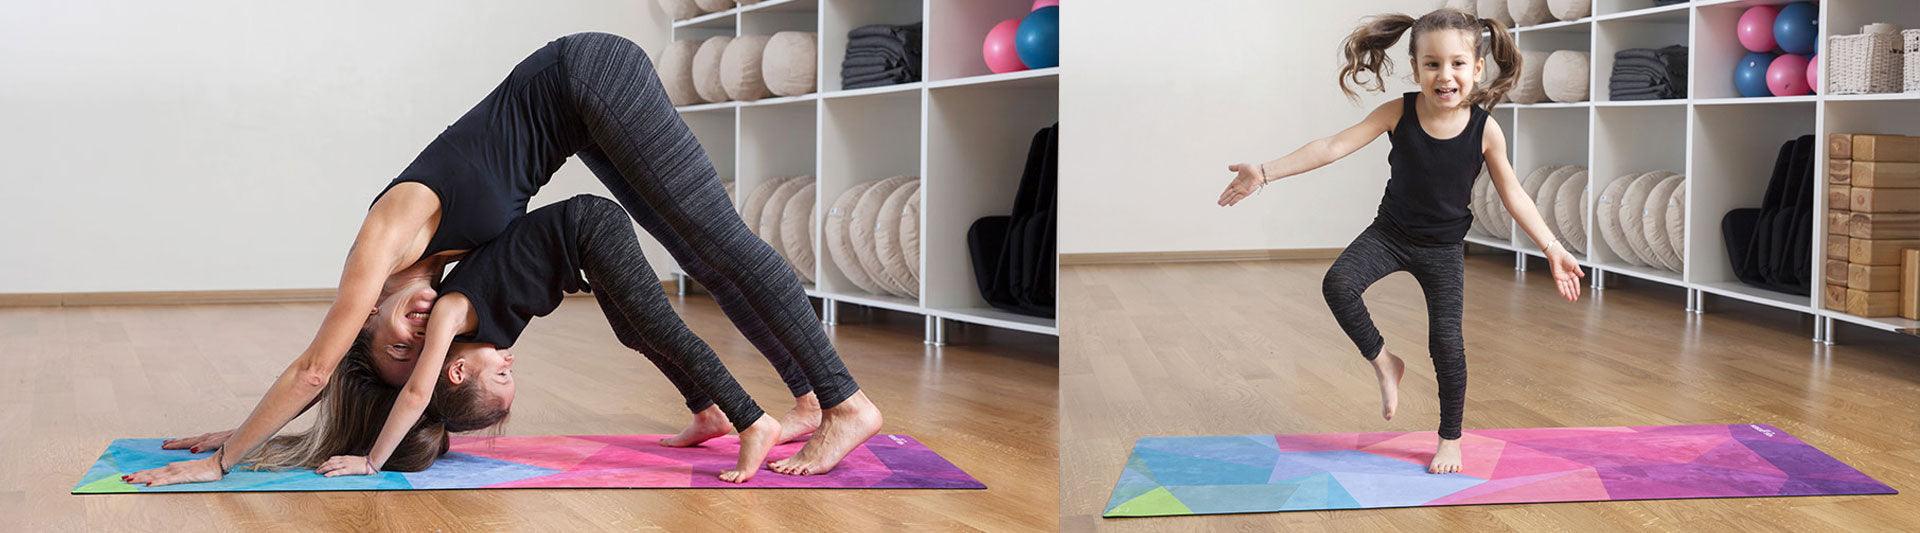 YDL Combo Kids Mats Collection | For Your Child's Practice - Yoga Design Lab 